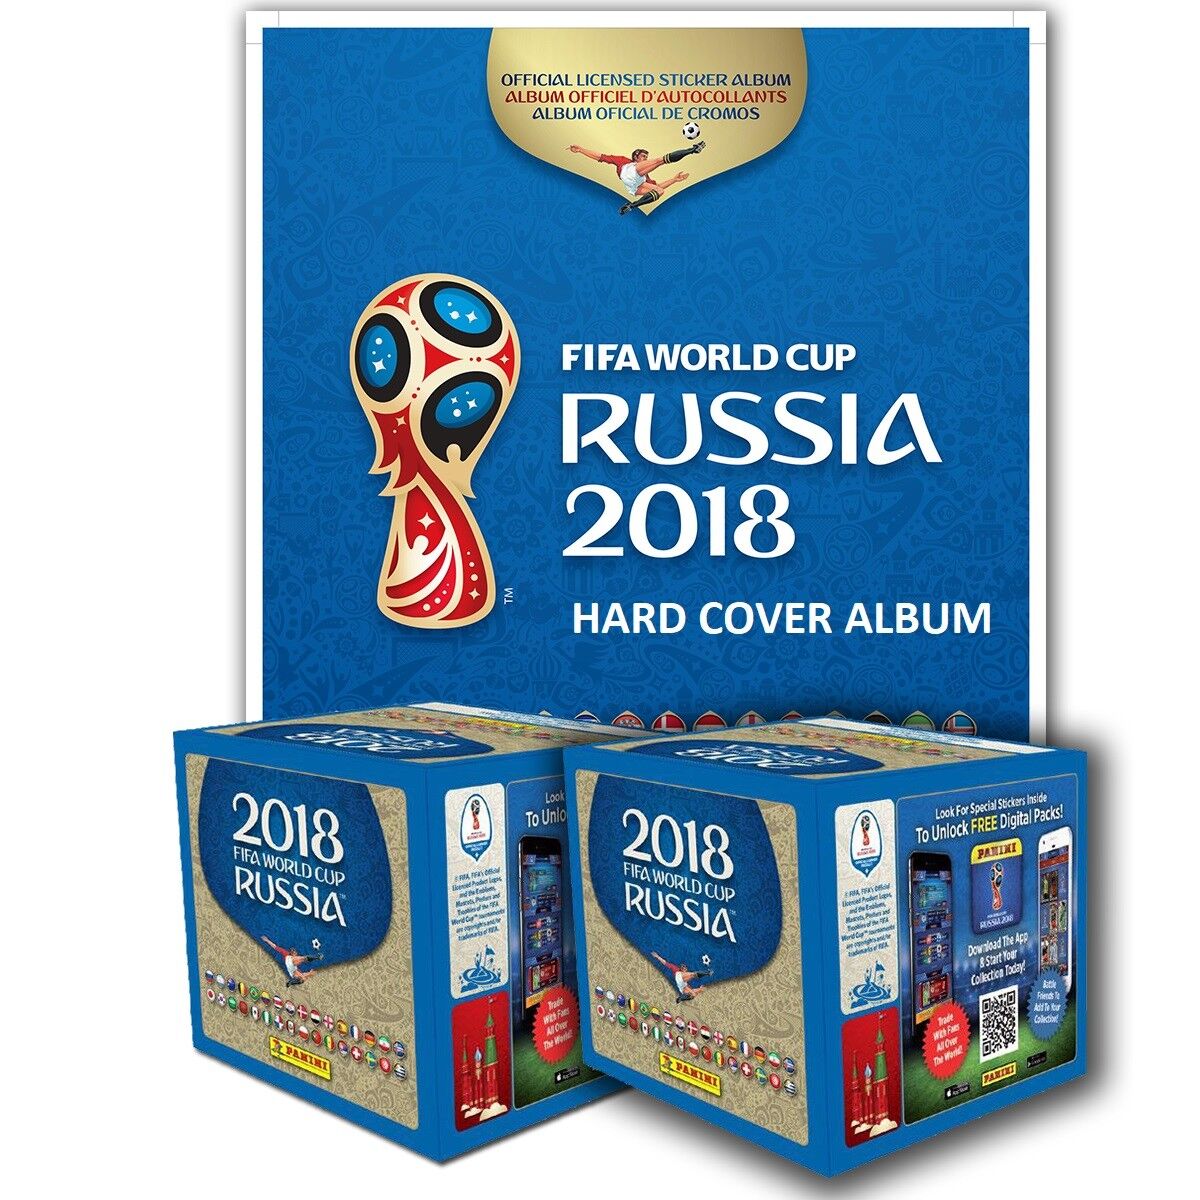 Panini New arrival 2018 FIFA World Cup Russia HARD FR + Quantity limited Boxes 2 ALBUM COVER